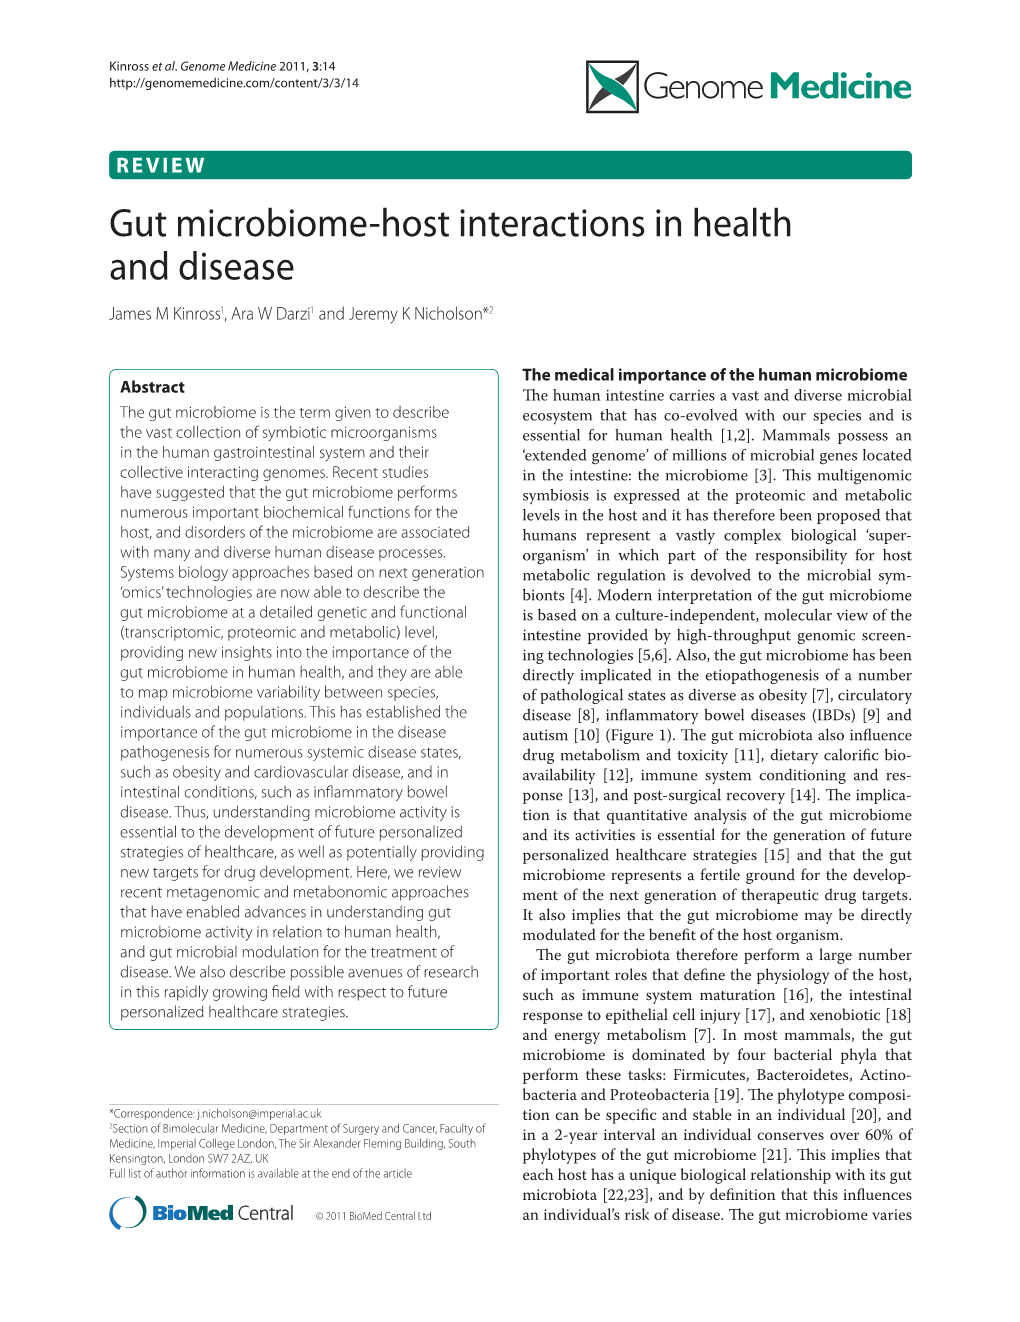 Gut Microbiome-Host Interactions in Health and Disease James M Kinross1, Ara W Darzi1 and Jeremy K Nicholson*2